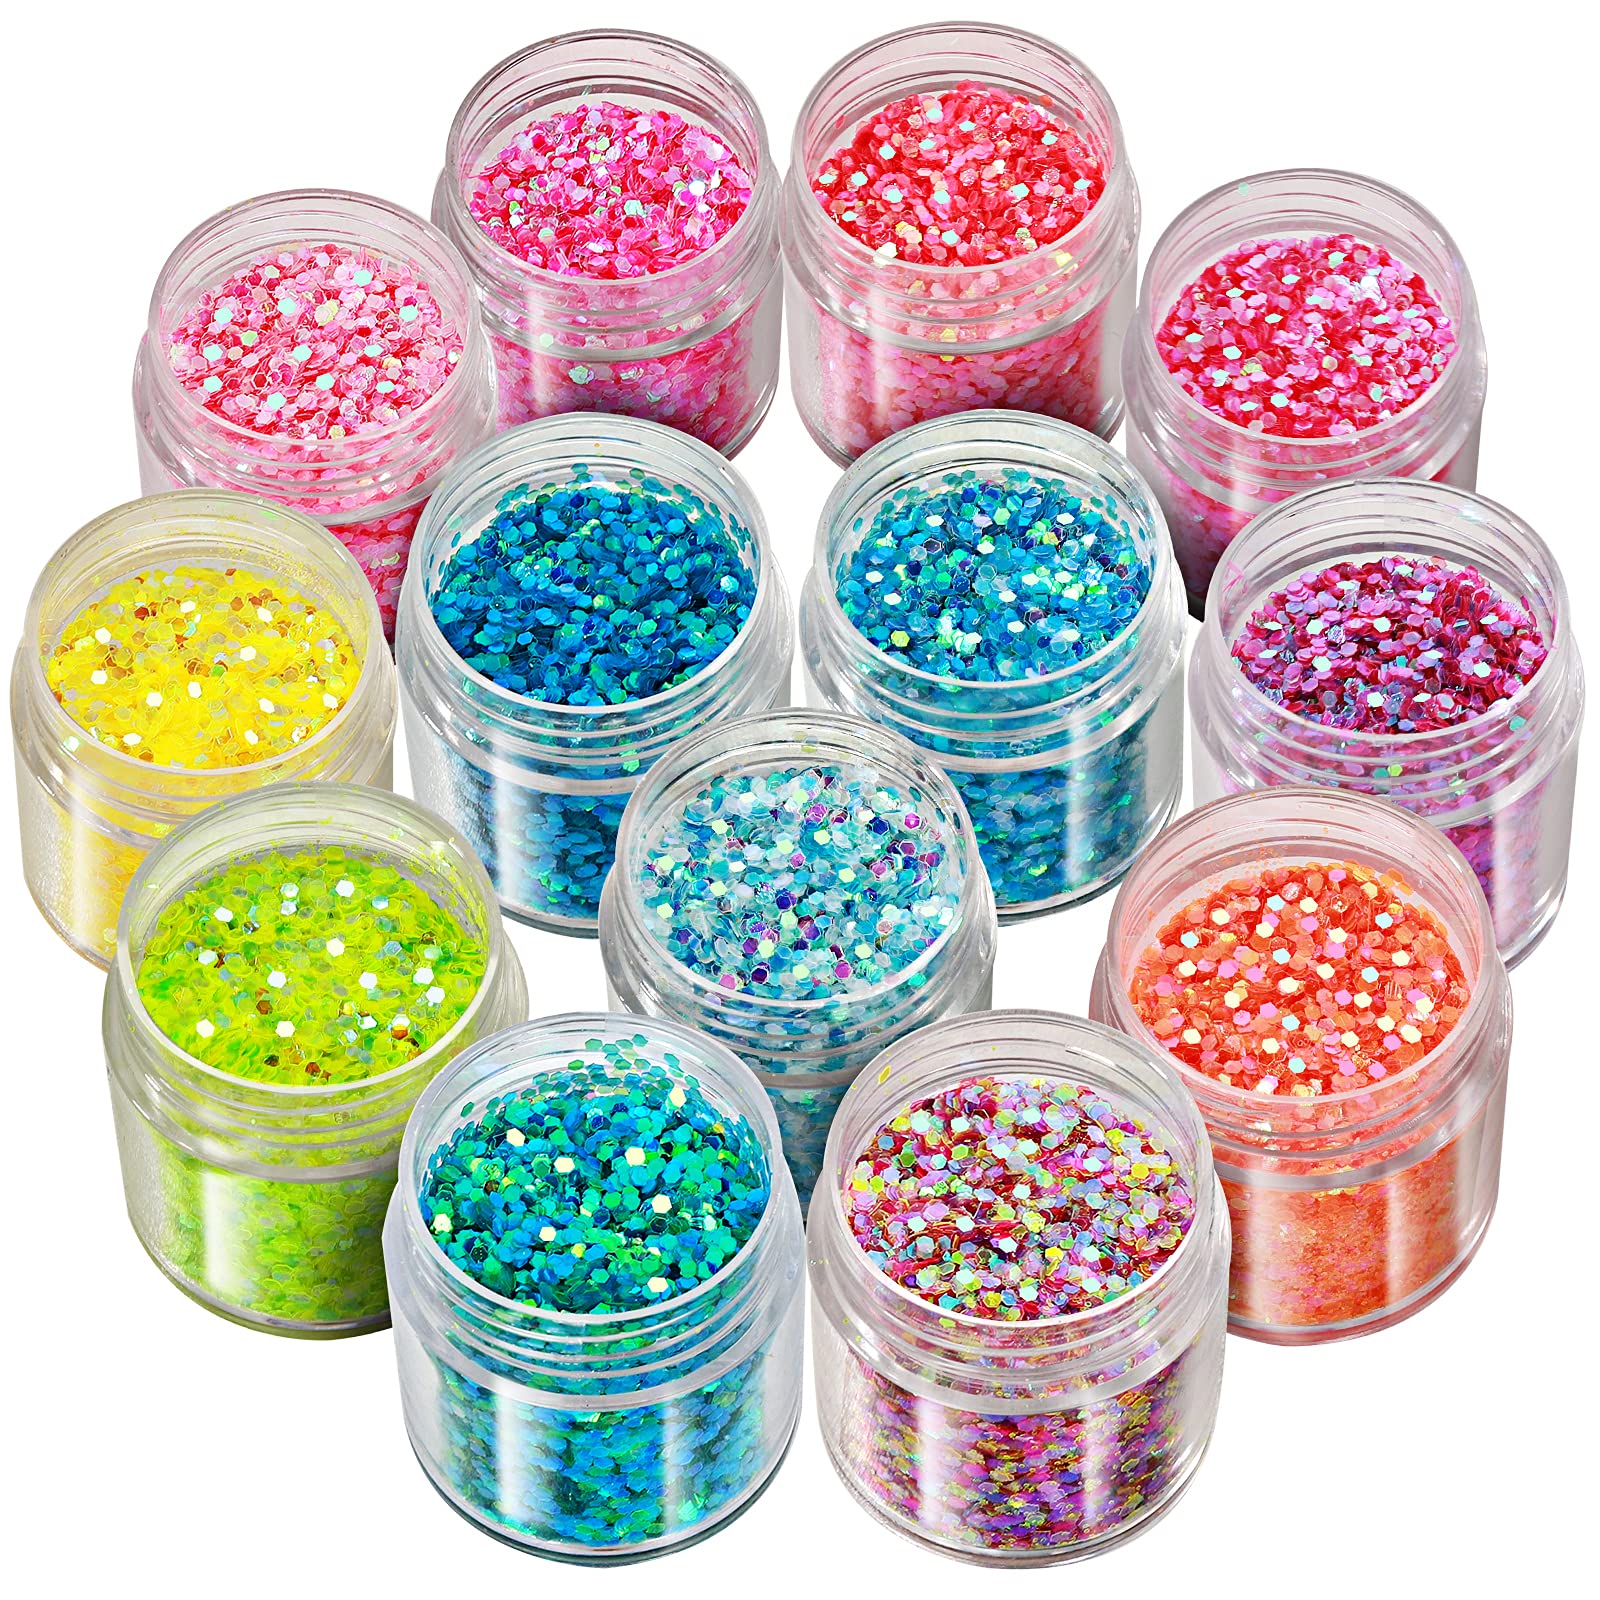 Chunky Glitter, YGDZ 13 Colors Holographic Iridescent Rainbow Sequins Nail Body Glitter Face Hair Eye Makeup Cosmetic Festival